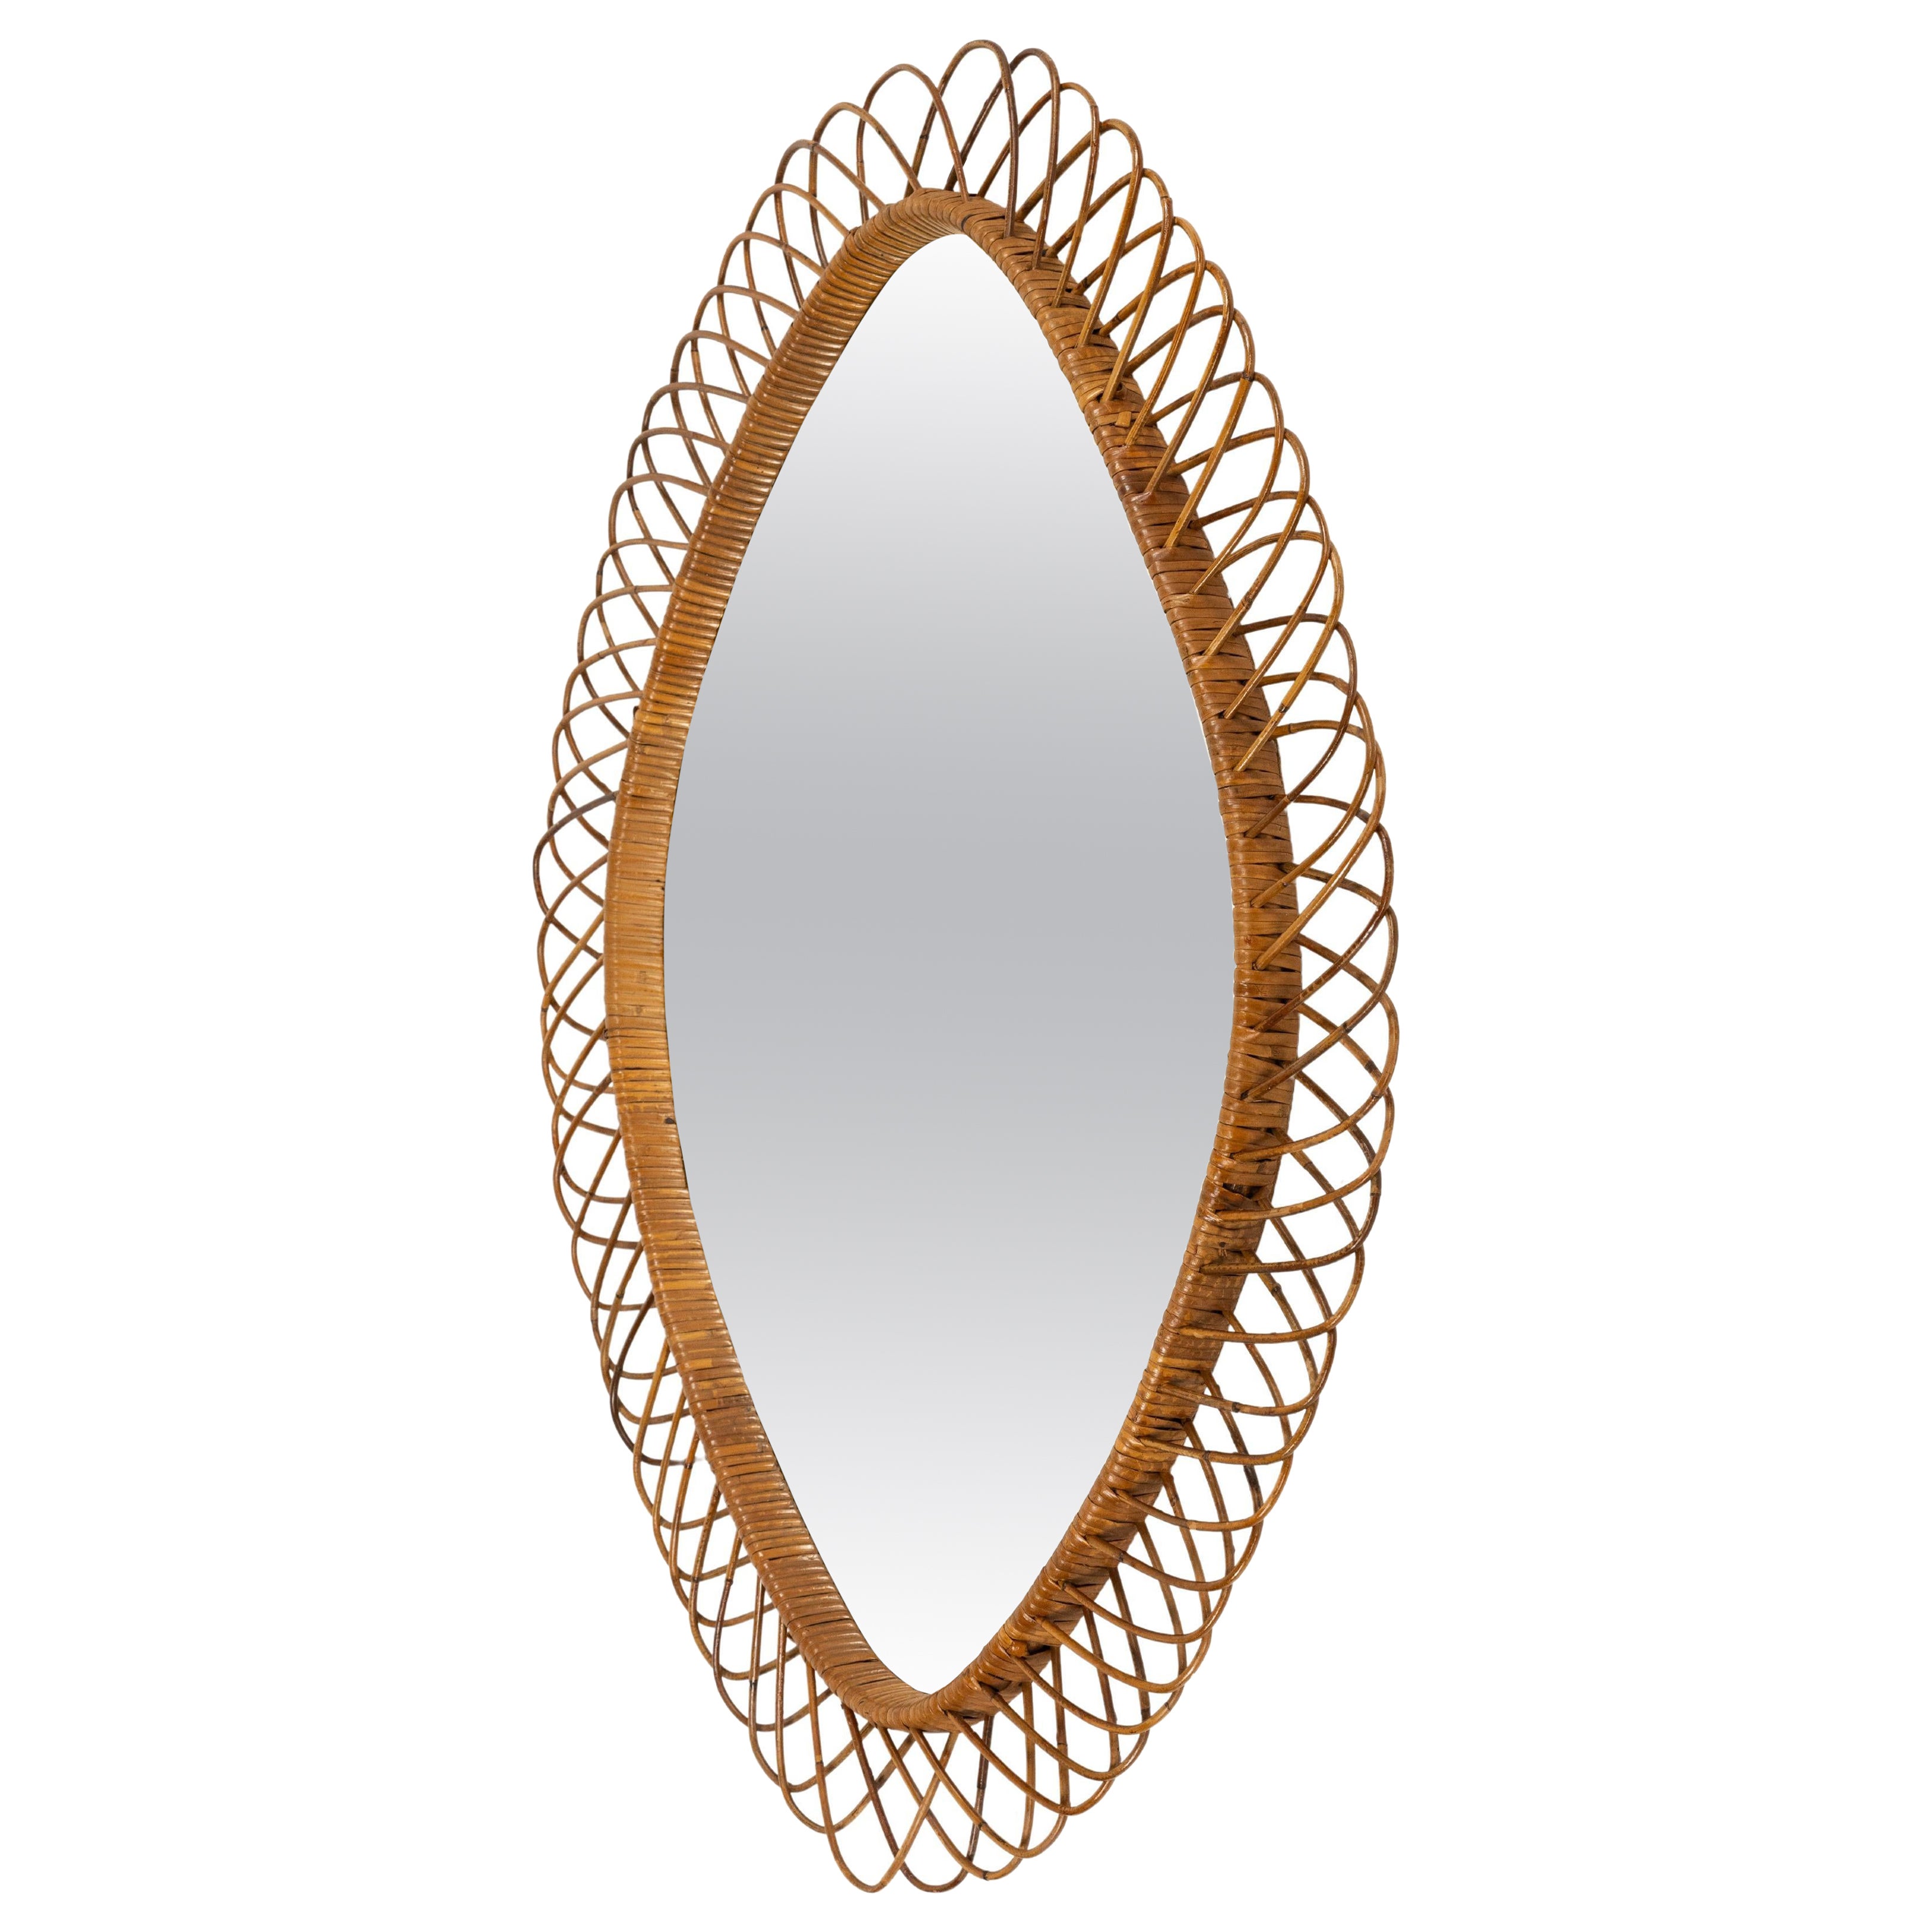 Midcentury Rattan and Wicker Oval Wall Mirror, Italy 1960s